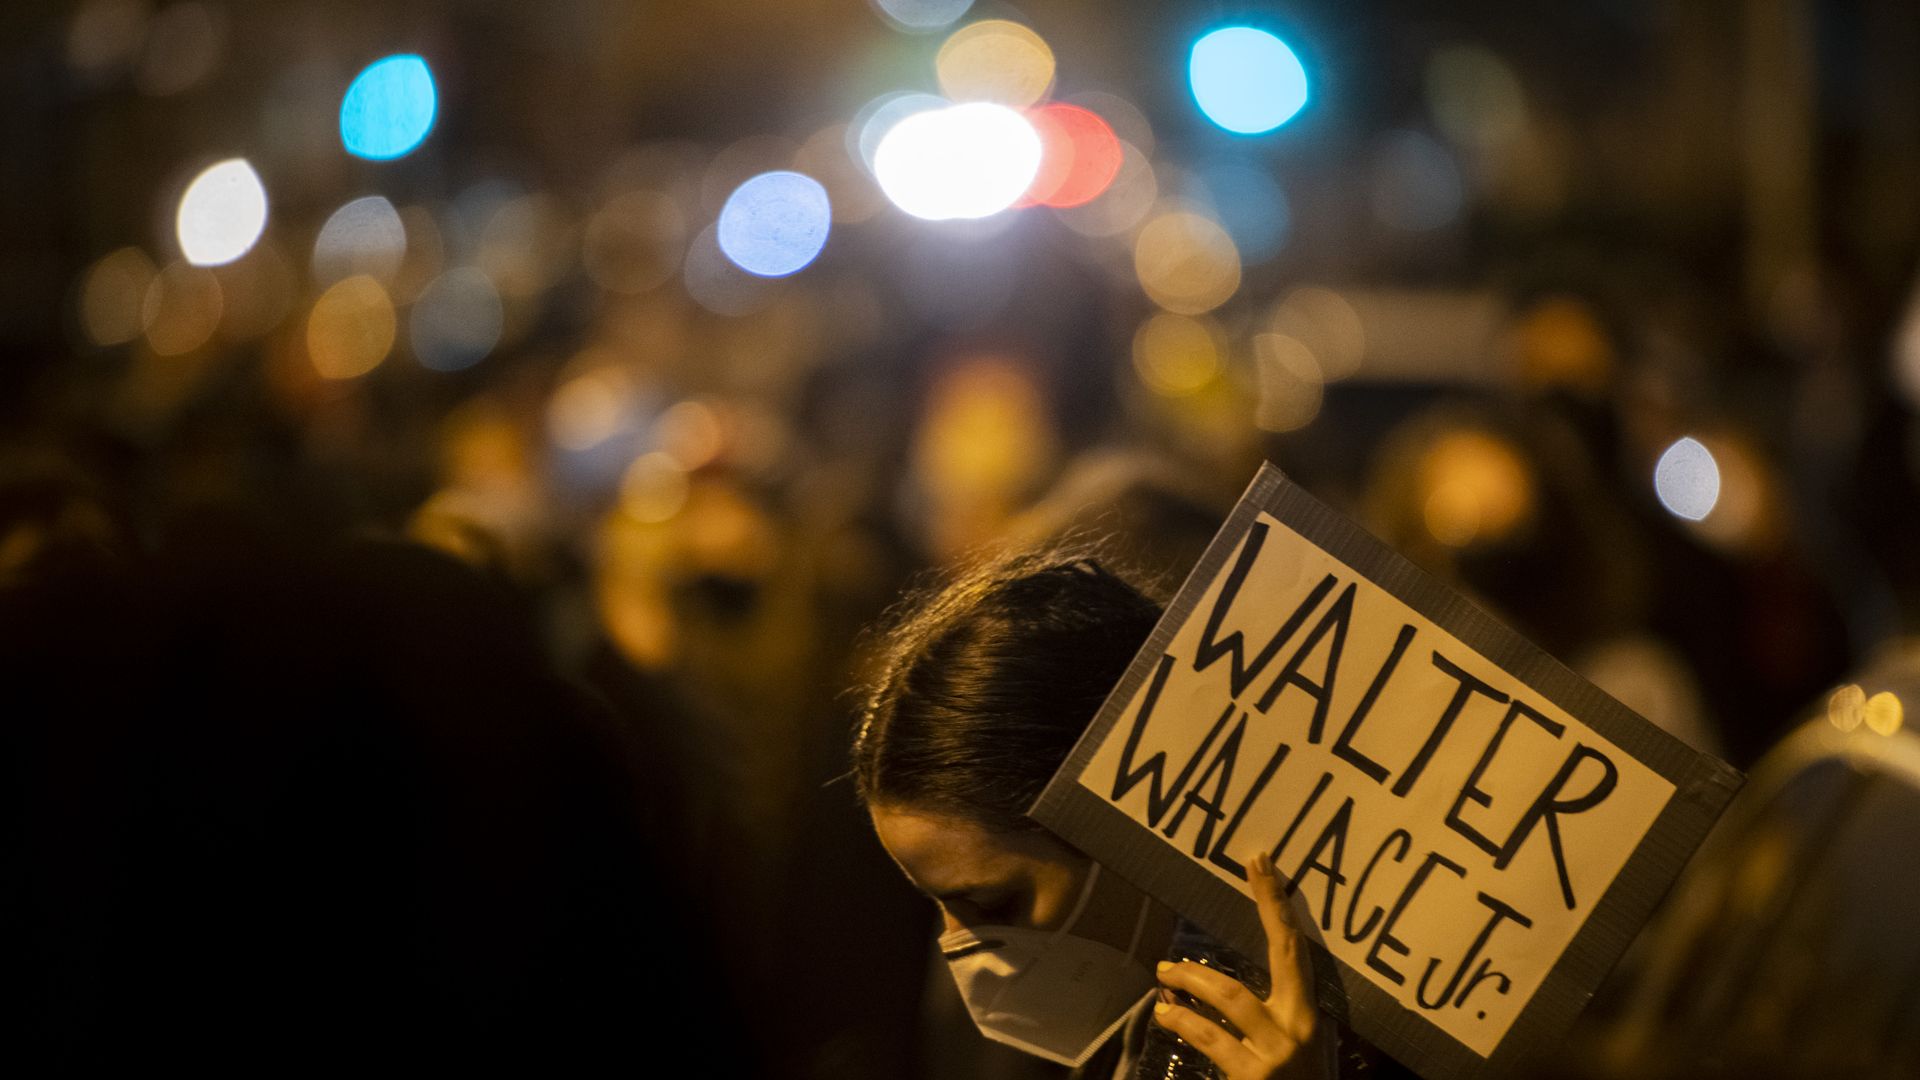 A demonstrator holds a placard reading "WALTER WALLACE JR." during a protest in Philadelphia.